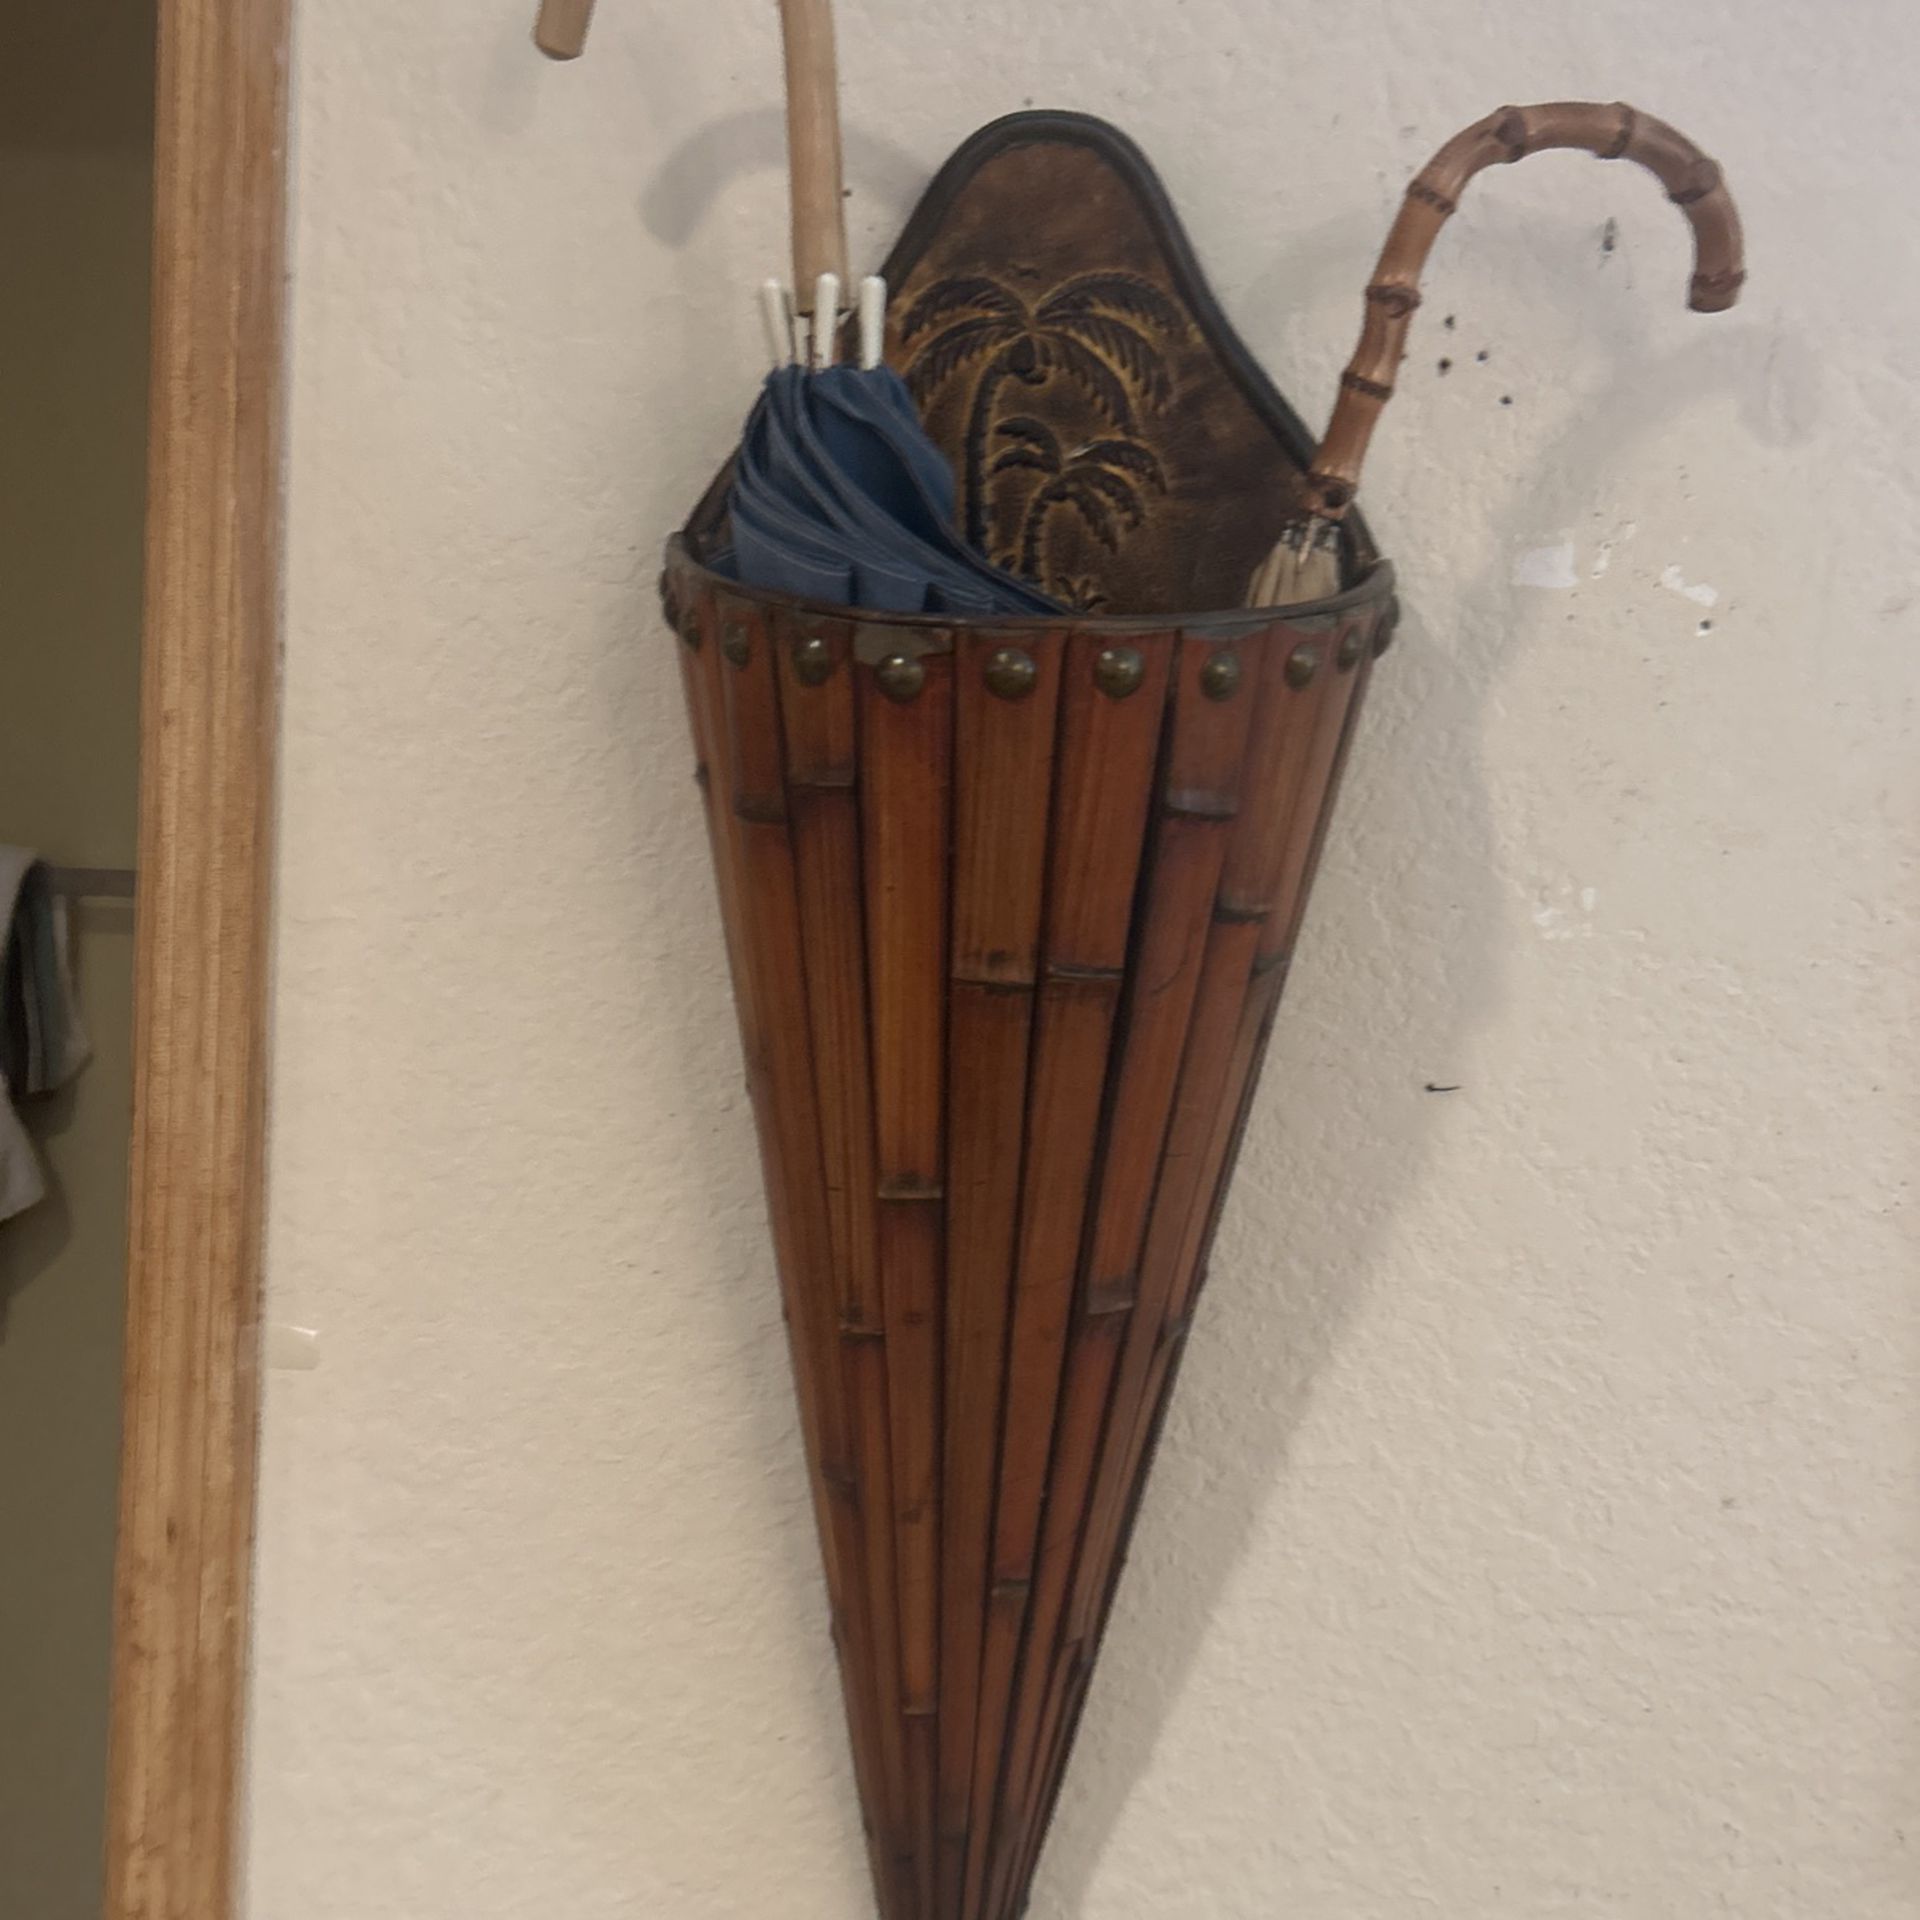 Antique Bamboo Umbrella Holder Or Plant Holder Great For Inside Or Outside By The Door Hang On A Wall Go Just About